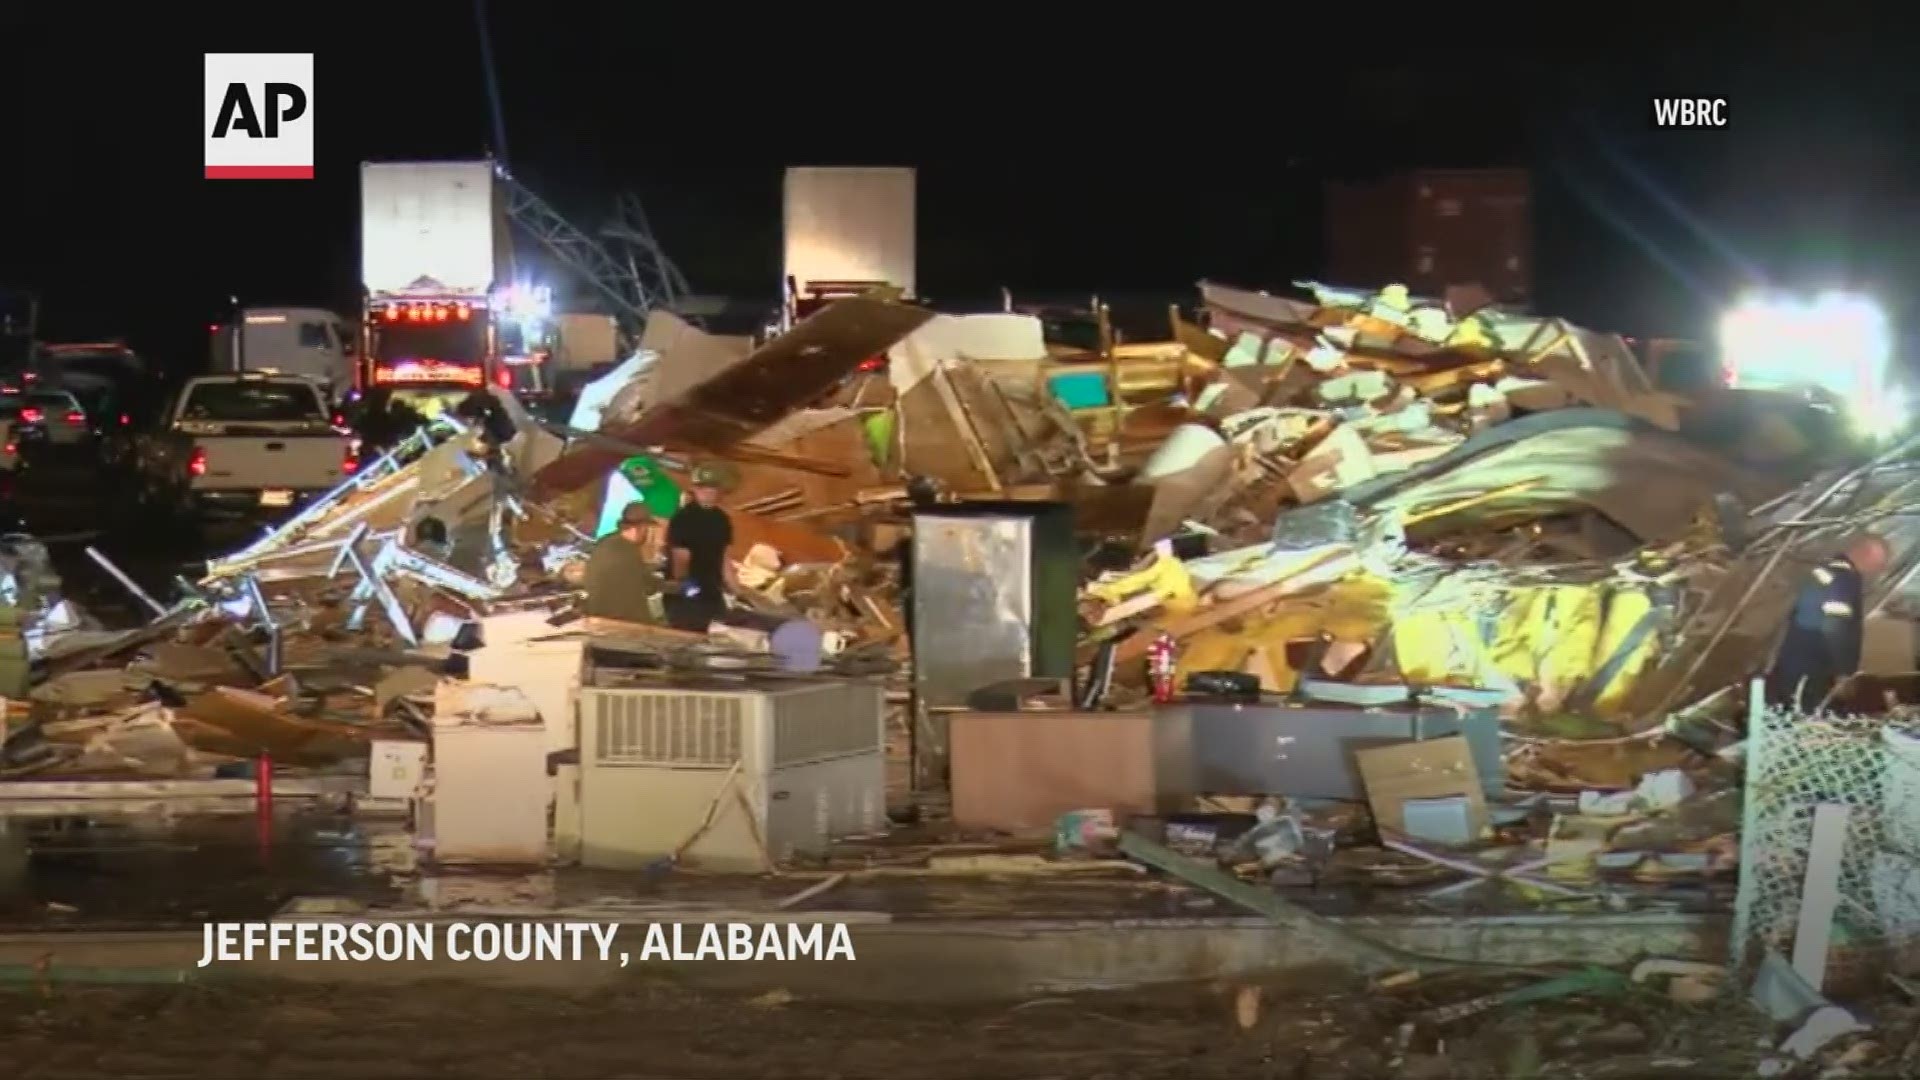 A tornado tore through an Alabama city north of Birmingham Monday night, leaving one person dead and the area with crumpled buildings and downed trees.